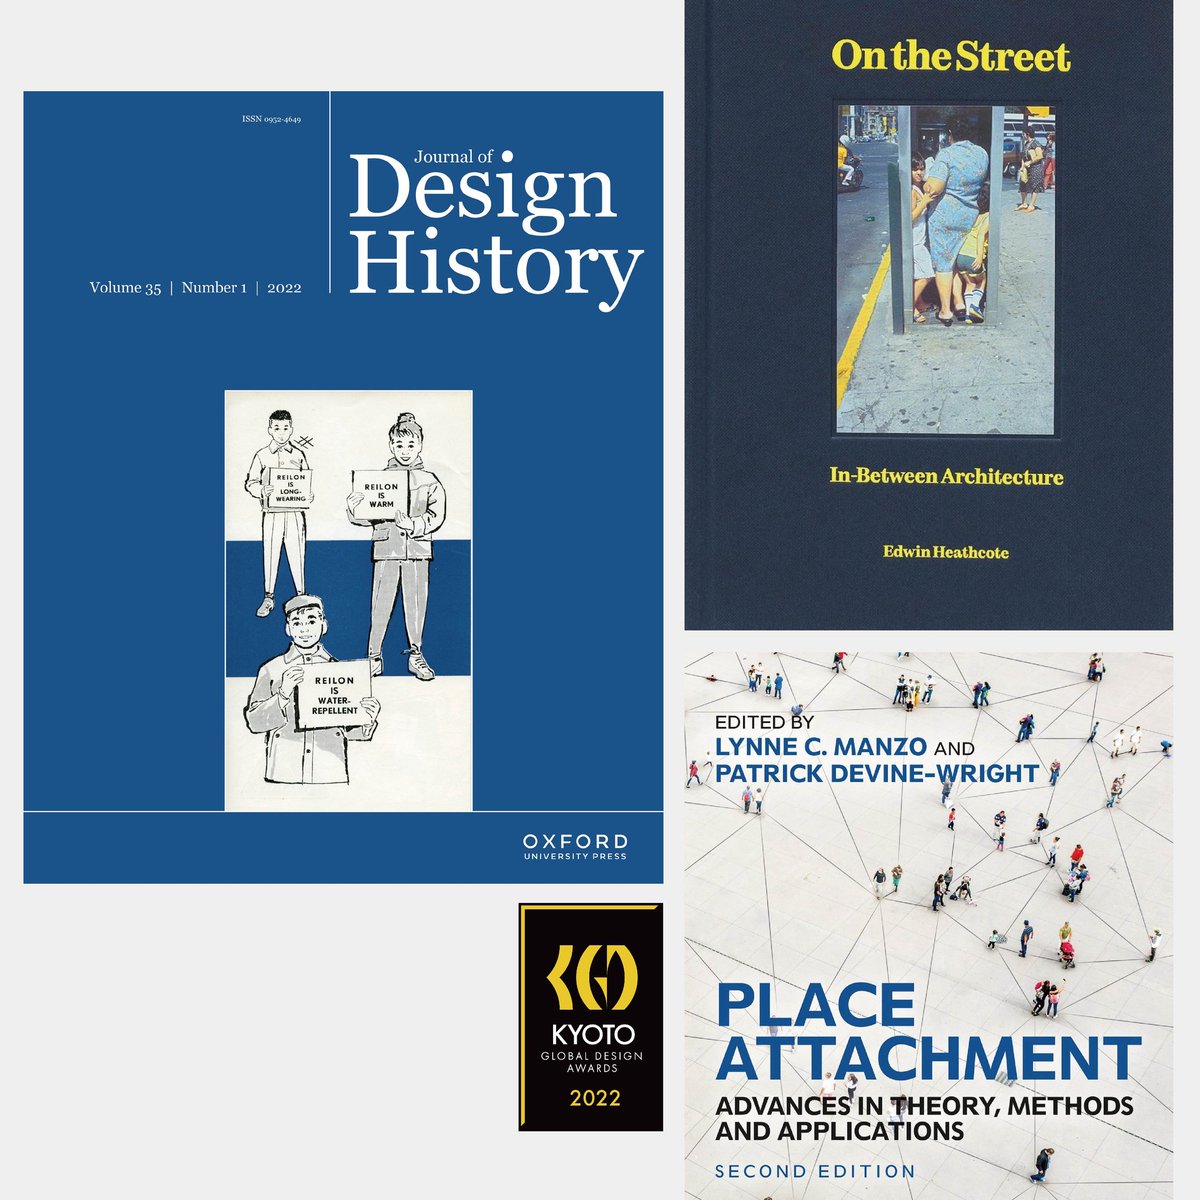 #KGDAwinner #theory 
Congratulations to our winners in the category of Theory!

 #KGDA #KGDA2022 #kgdawards #design #designawards #designtheory #designhistory #journal #KGDA_theory